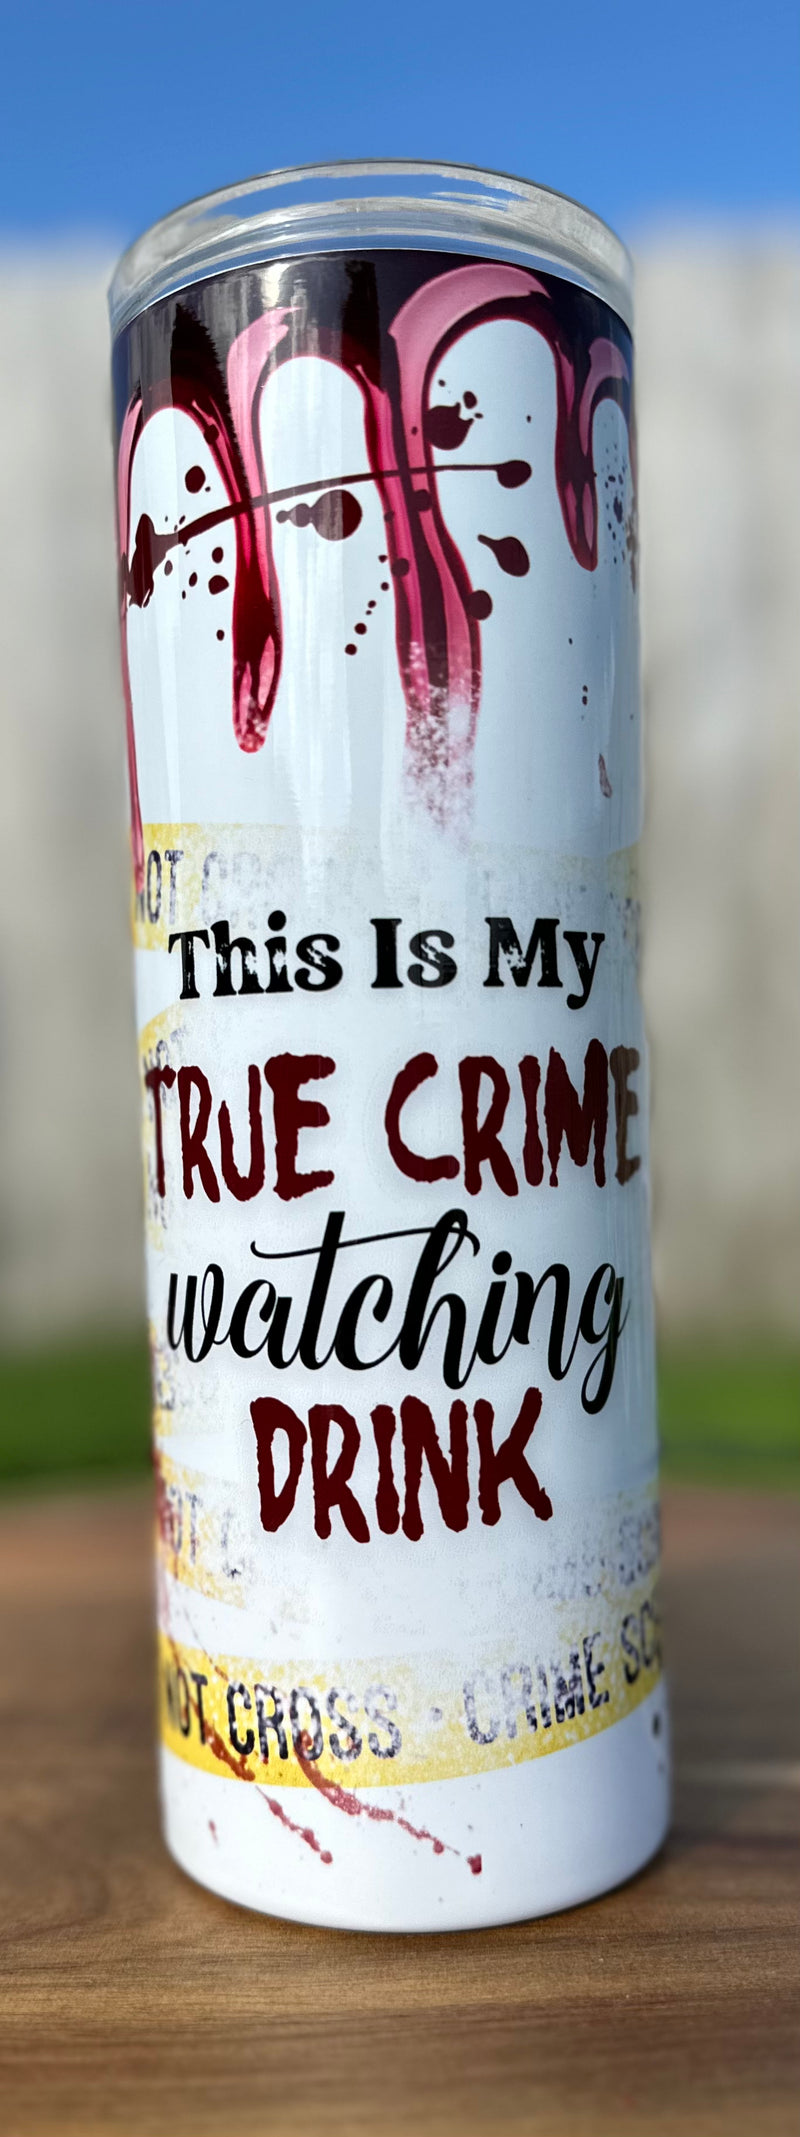 This is my true crime watching drink